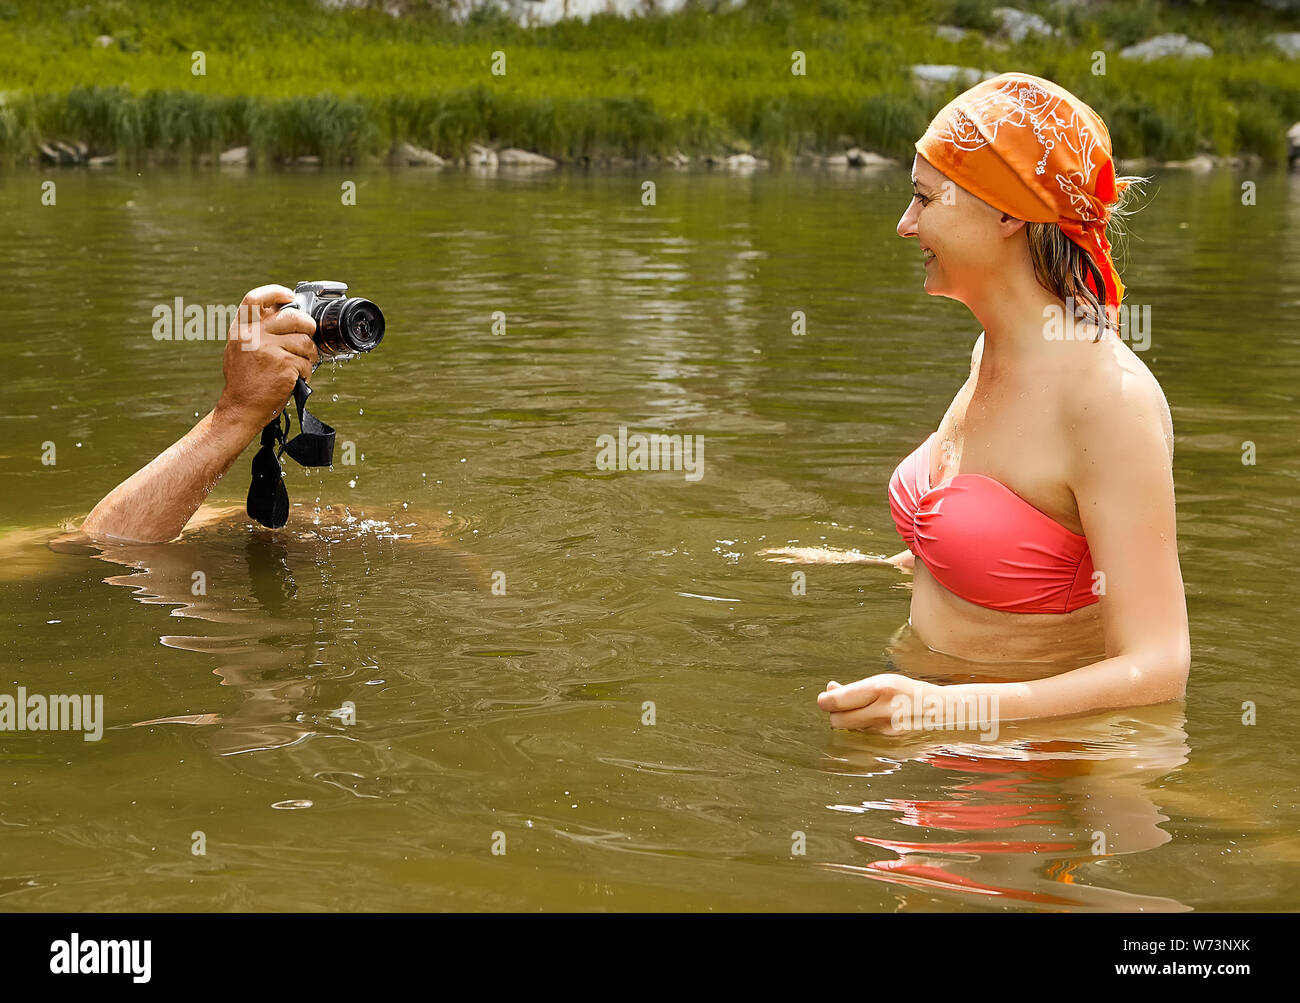 Man is taking pictures of young beautiful smiling wet woman in